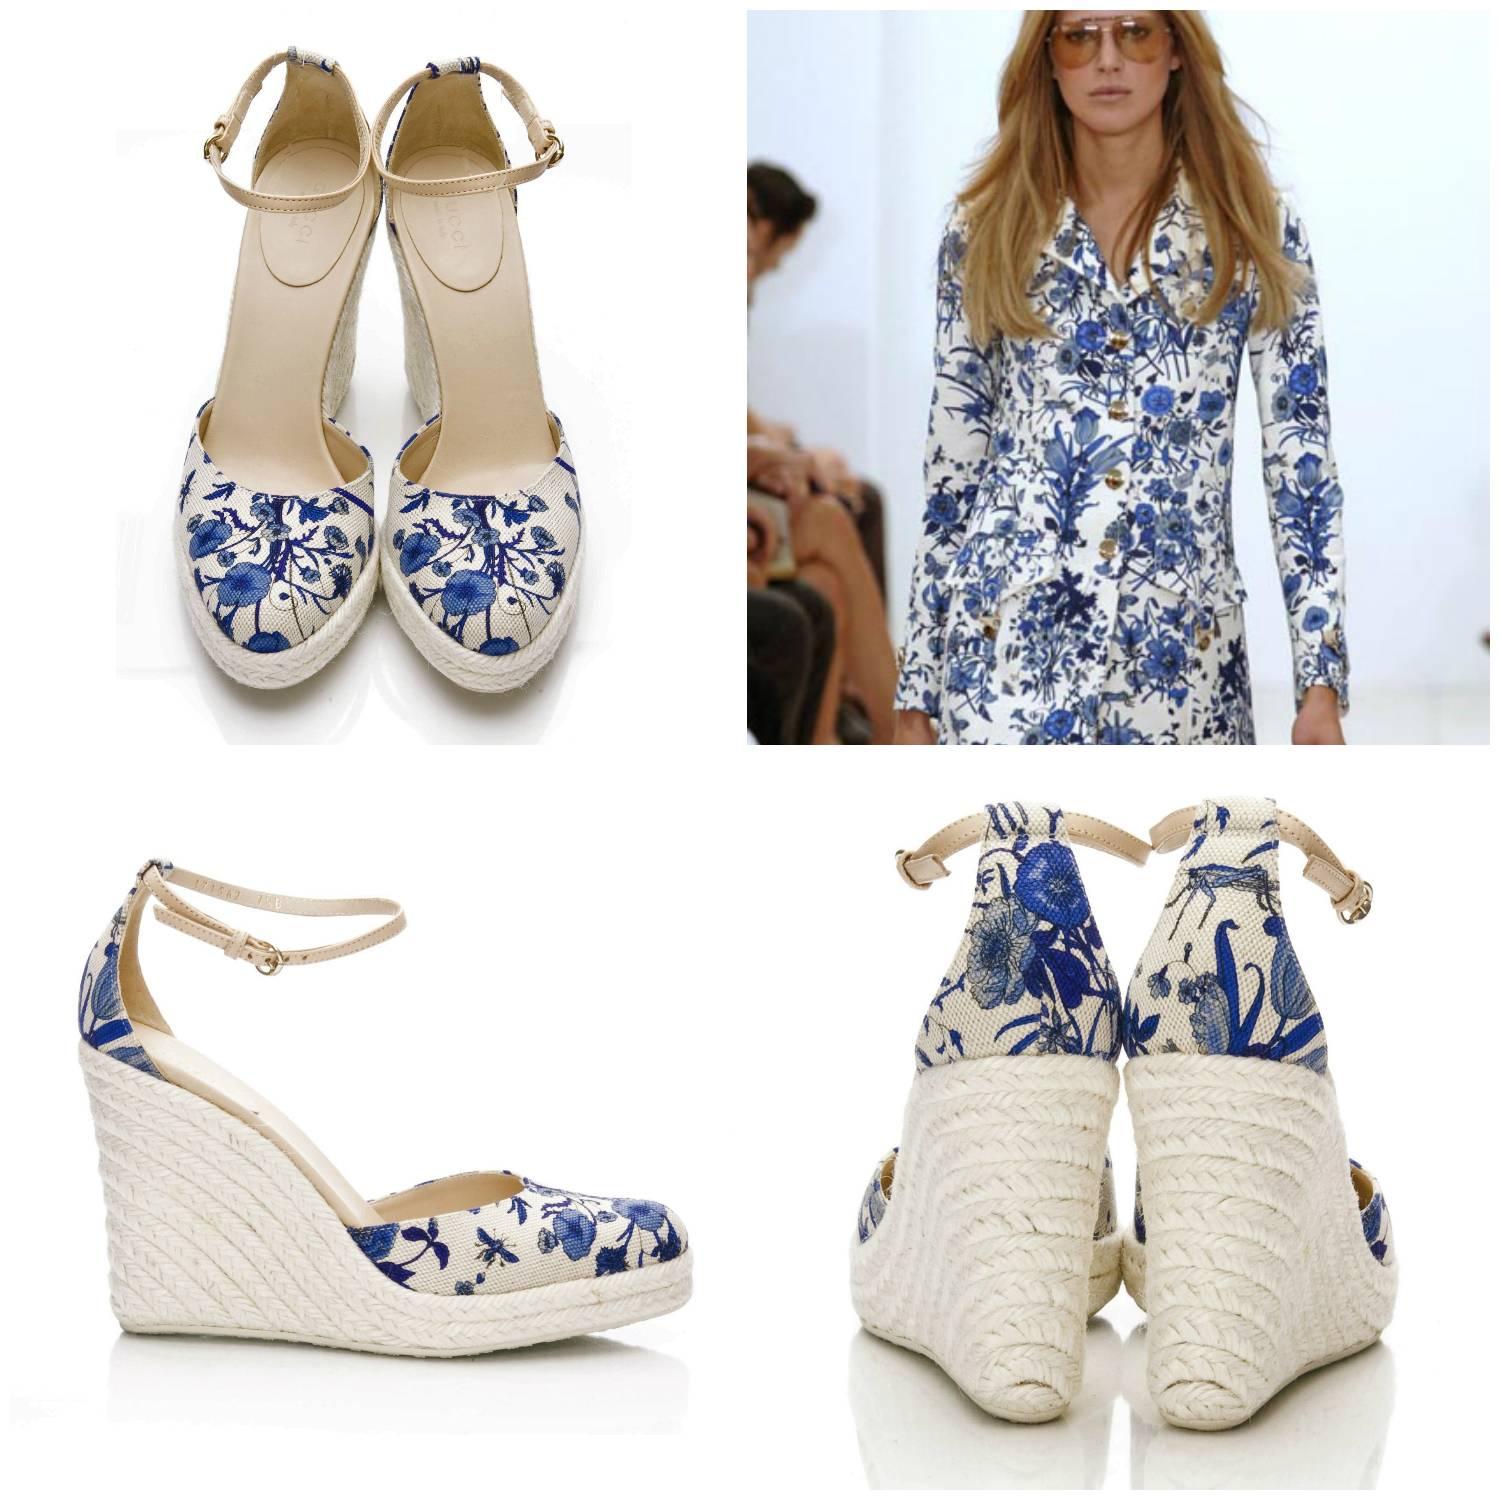 Gucci Cruise 2007 Wedges
Size: 7.5
Brand New
* Stunning Gucci Flora Wedges
* Runway Cruise 2007 Line
* Famous Flora Canvas Print
* Blue & Cream
*Woven Platform Heel
* Leather Adjustable Ankle Strap
* 1